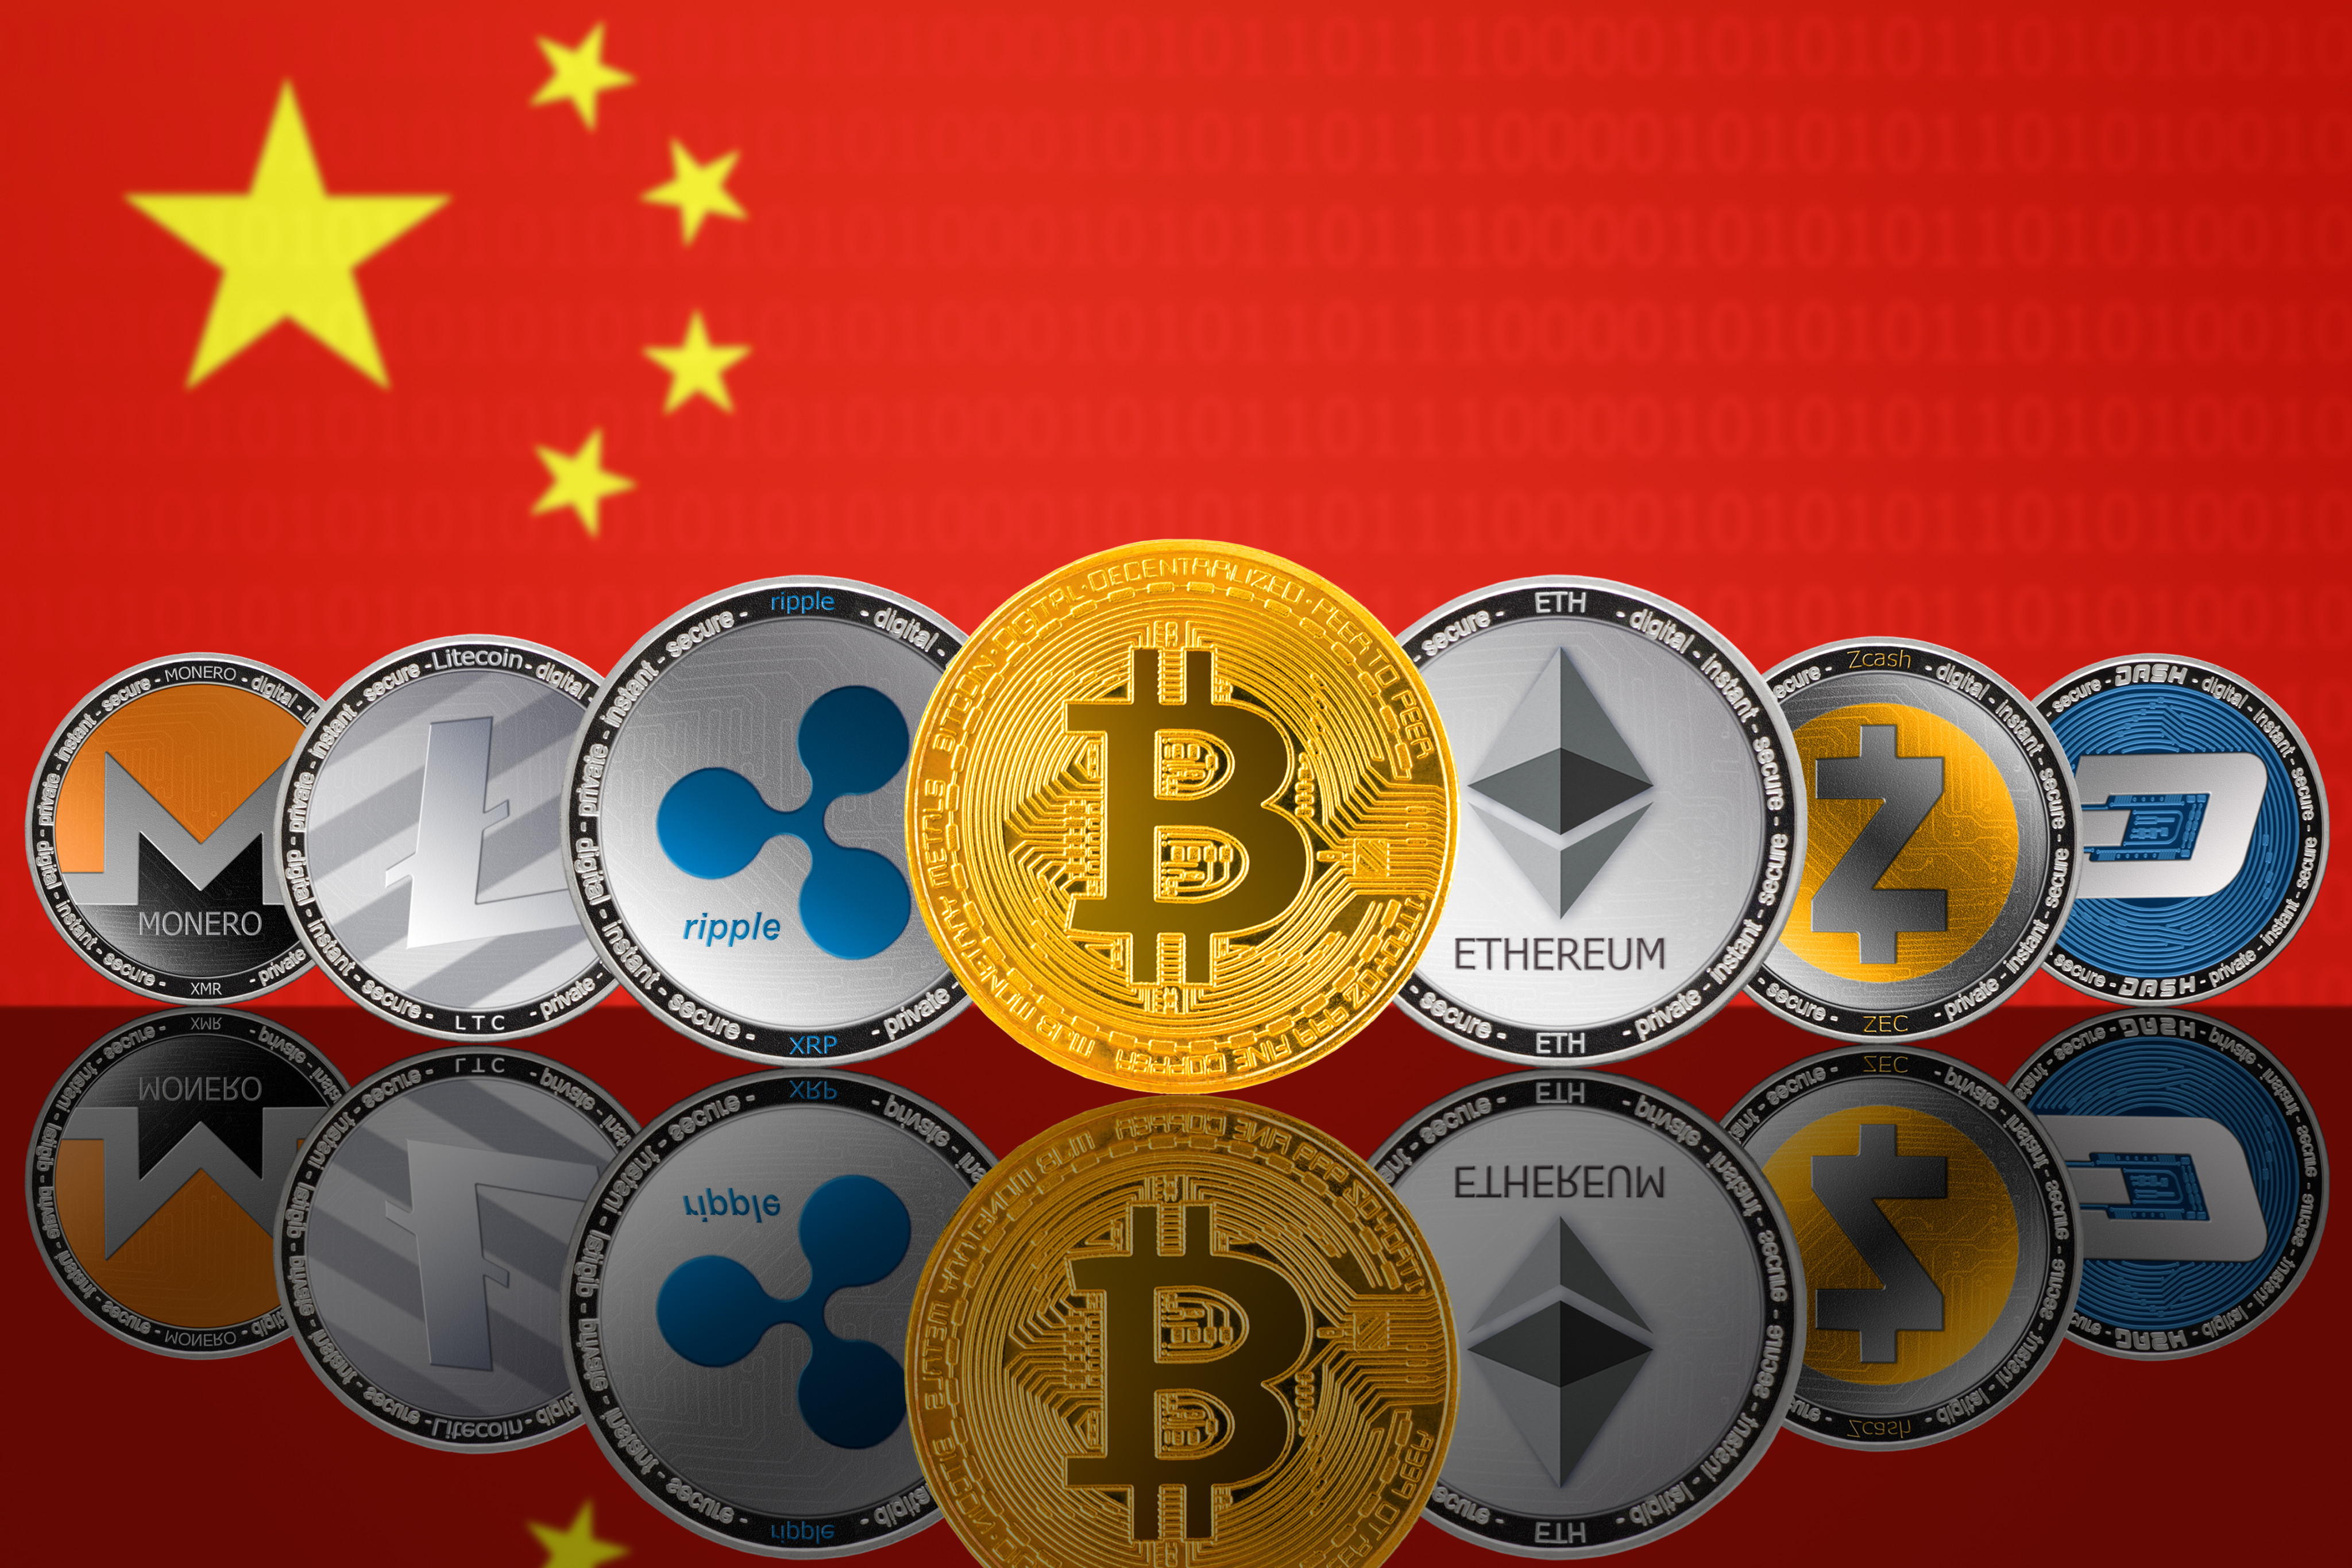 China over the years has ramped up its crackdown on all activities related to cryptocurrencies, citing financial stability risks. Image: Shutterstock